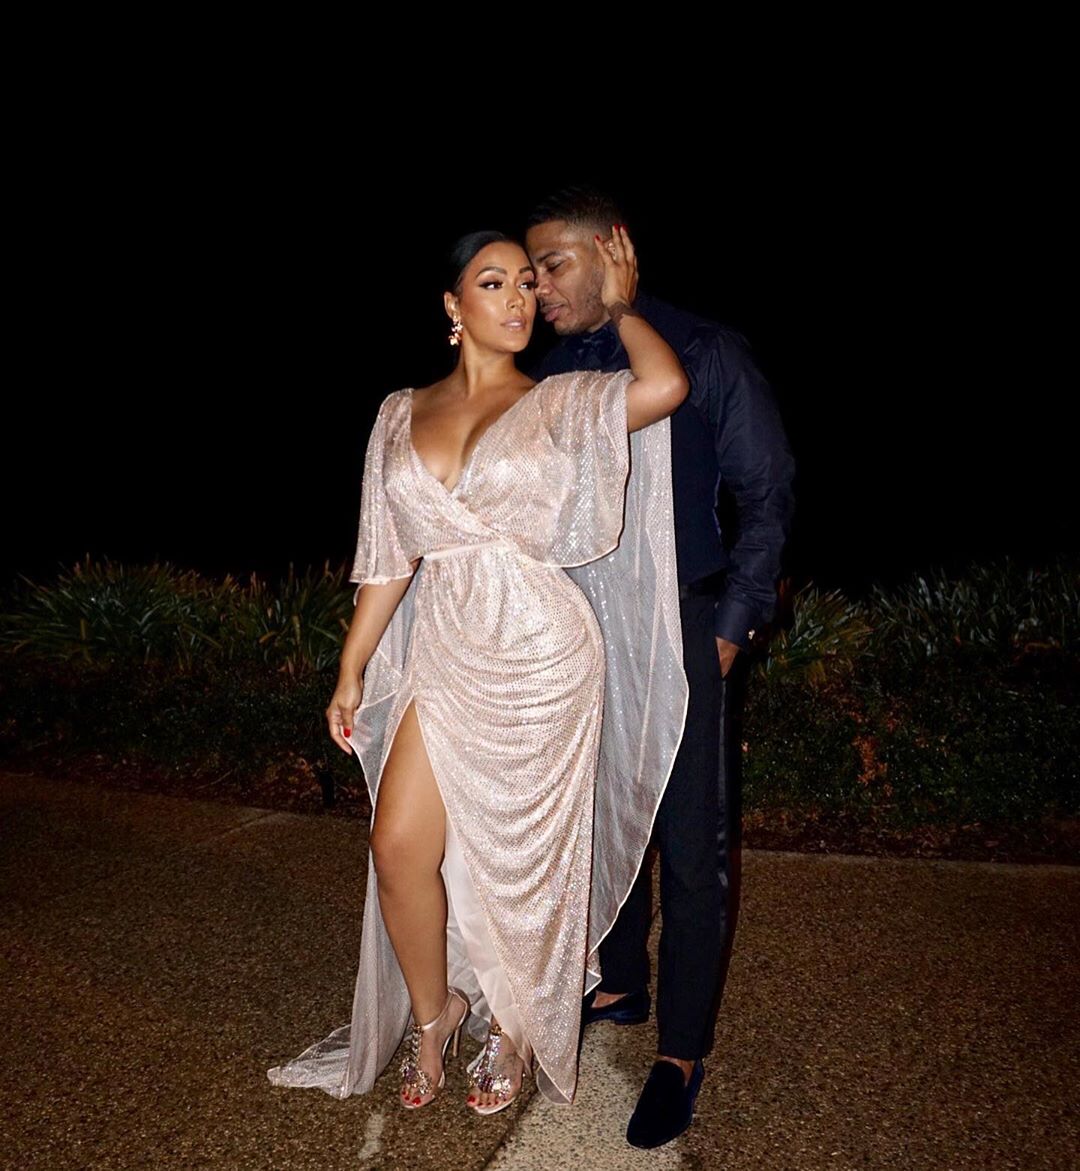 shantel jackson and nelly married